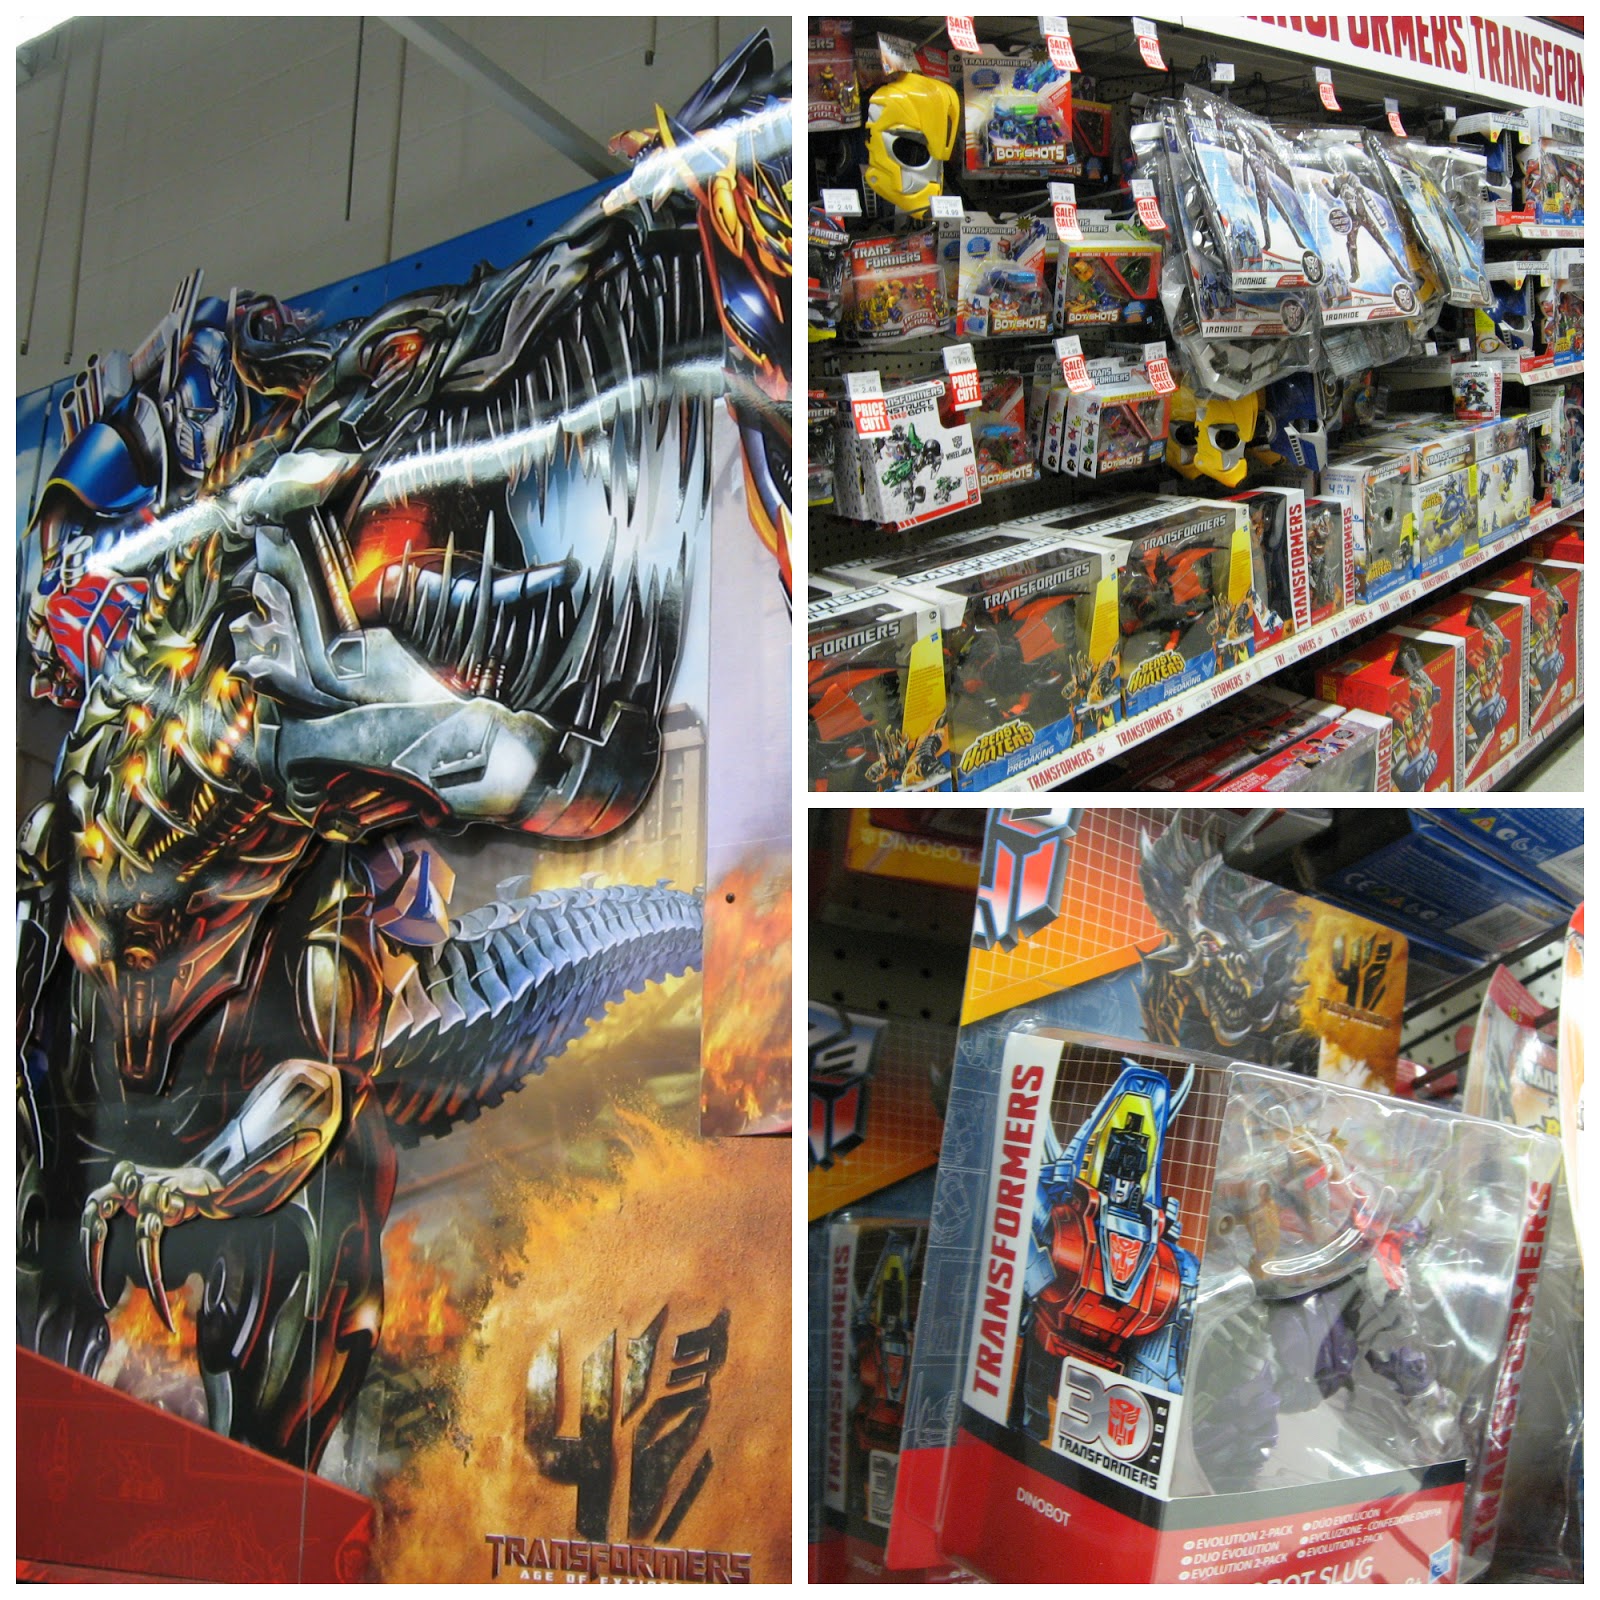 Transformers 4 Age of Extinction at Toys R Us Northampton